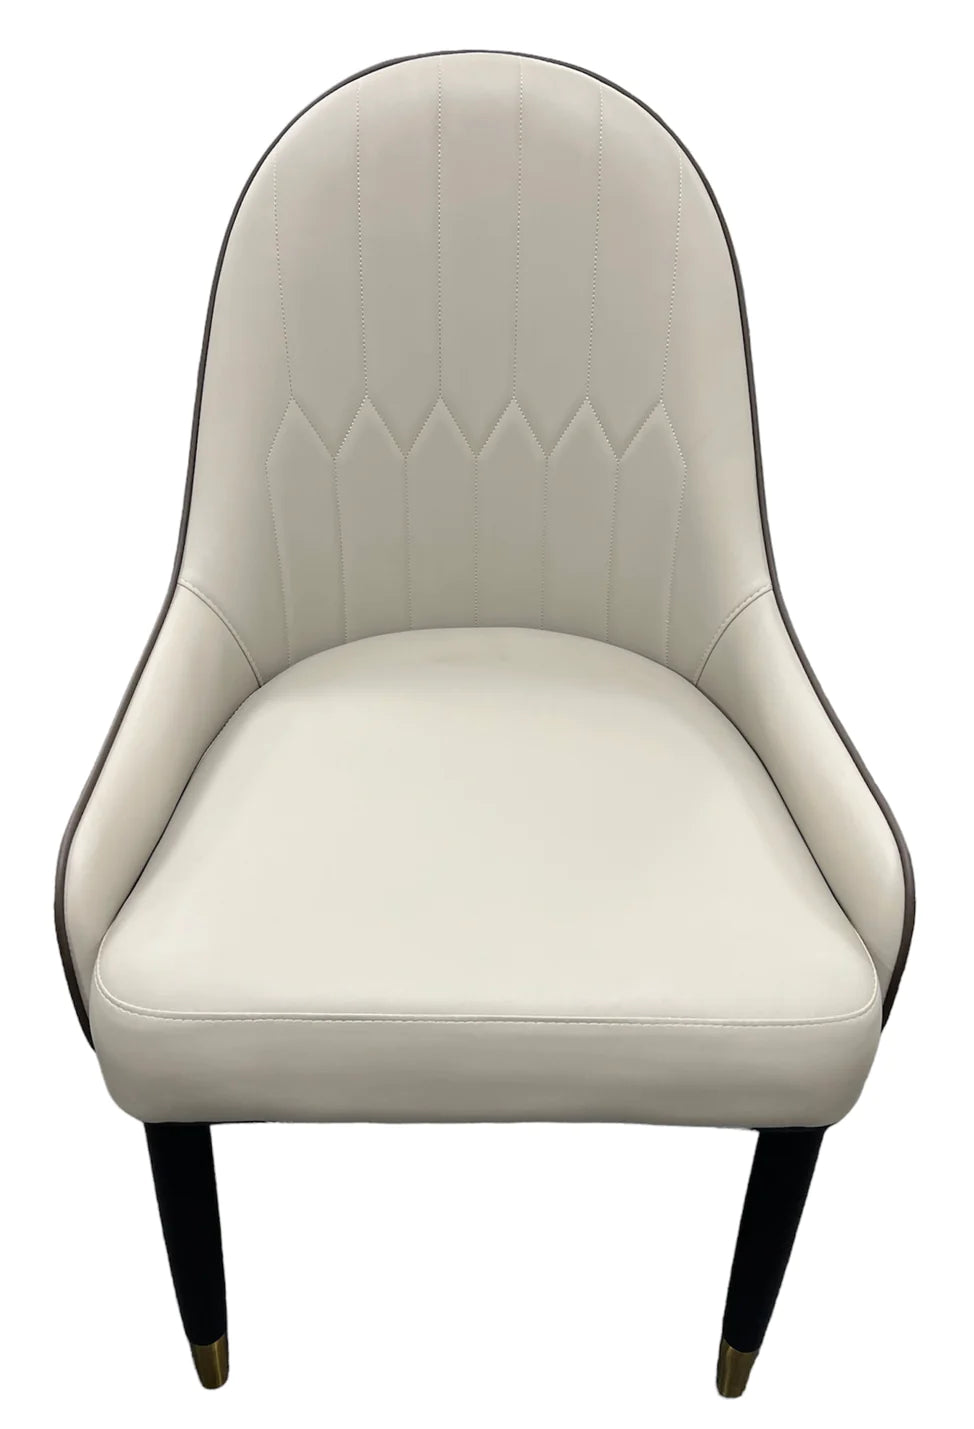 Bentley two tone chair